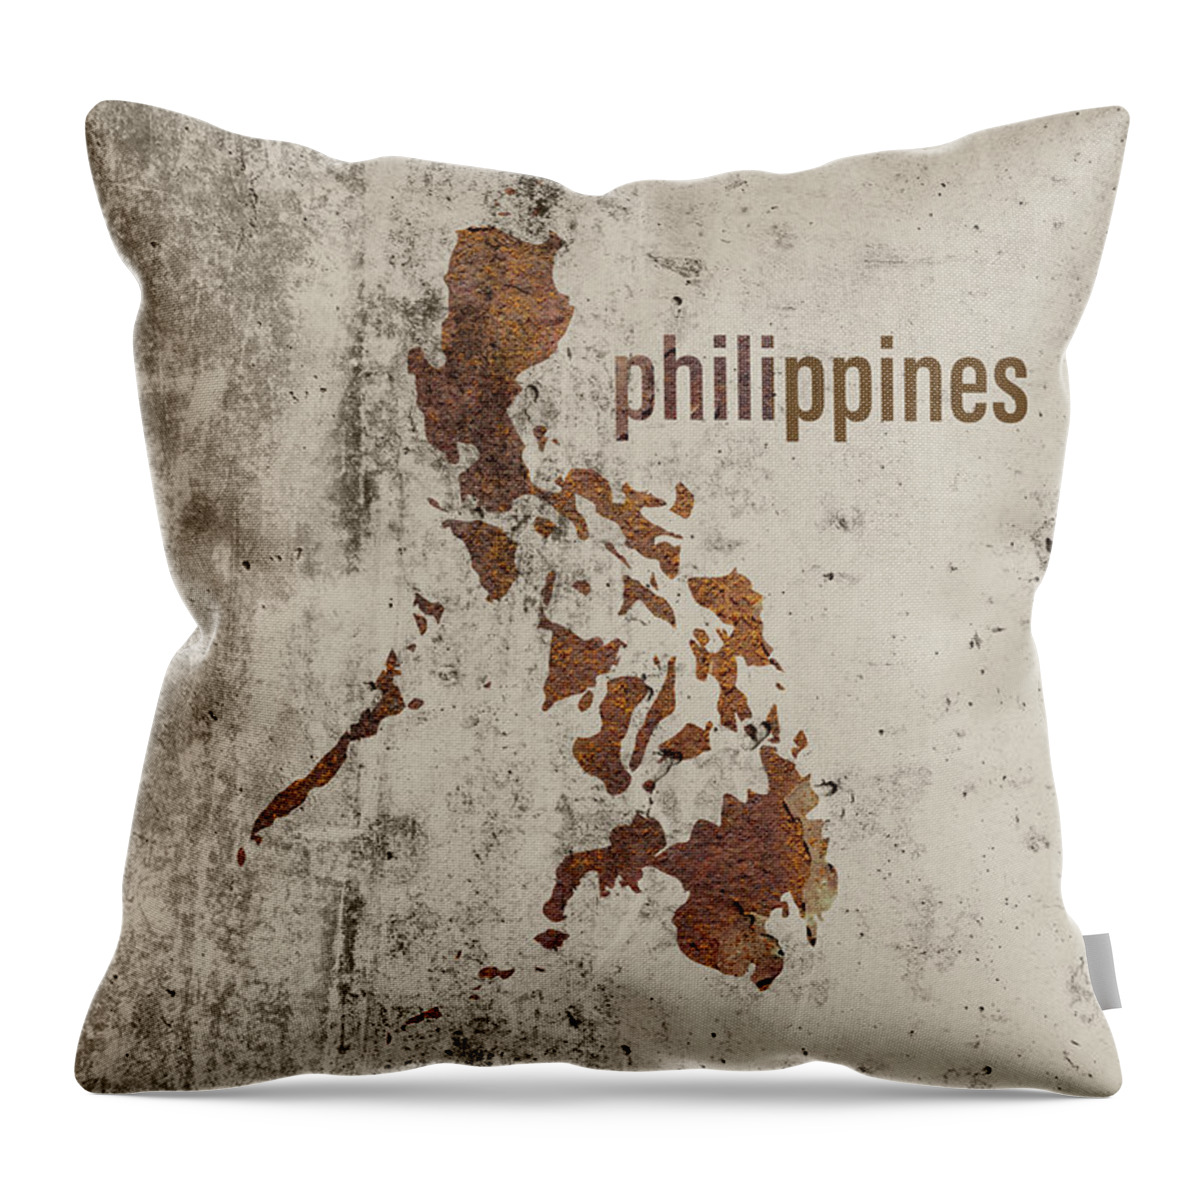 Philippines Throw Pillow featuring the mixed media Philippines Map Rusty Cement Country Shape Series by Design Turnpike